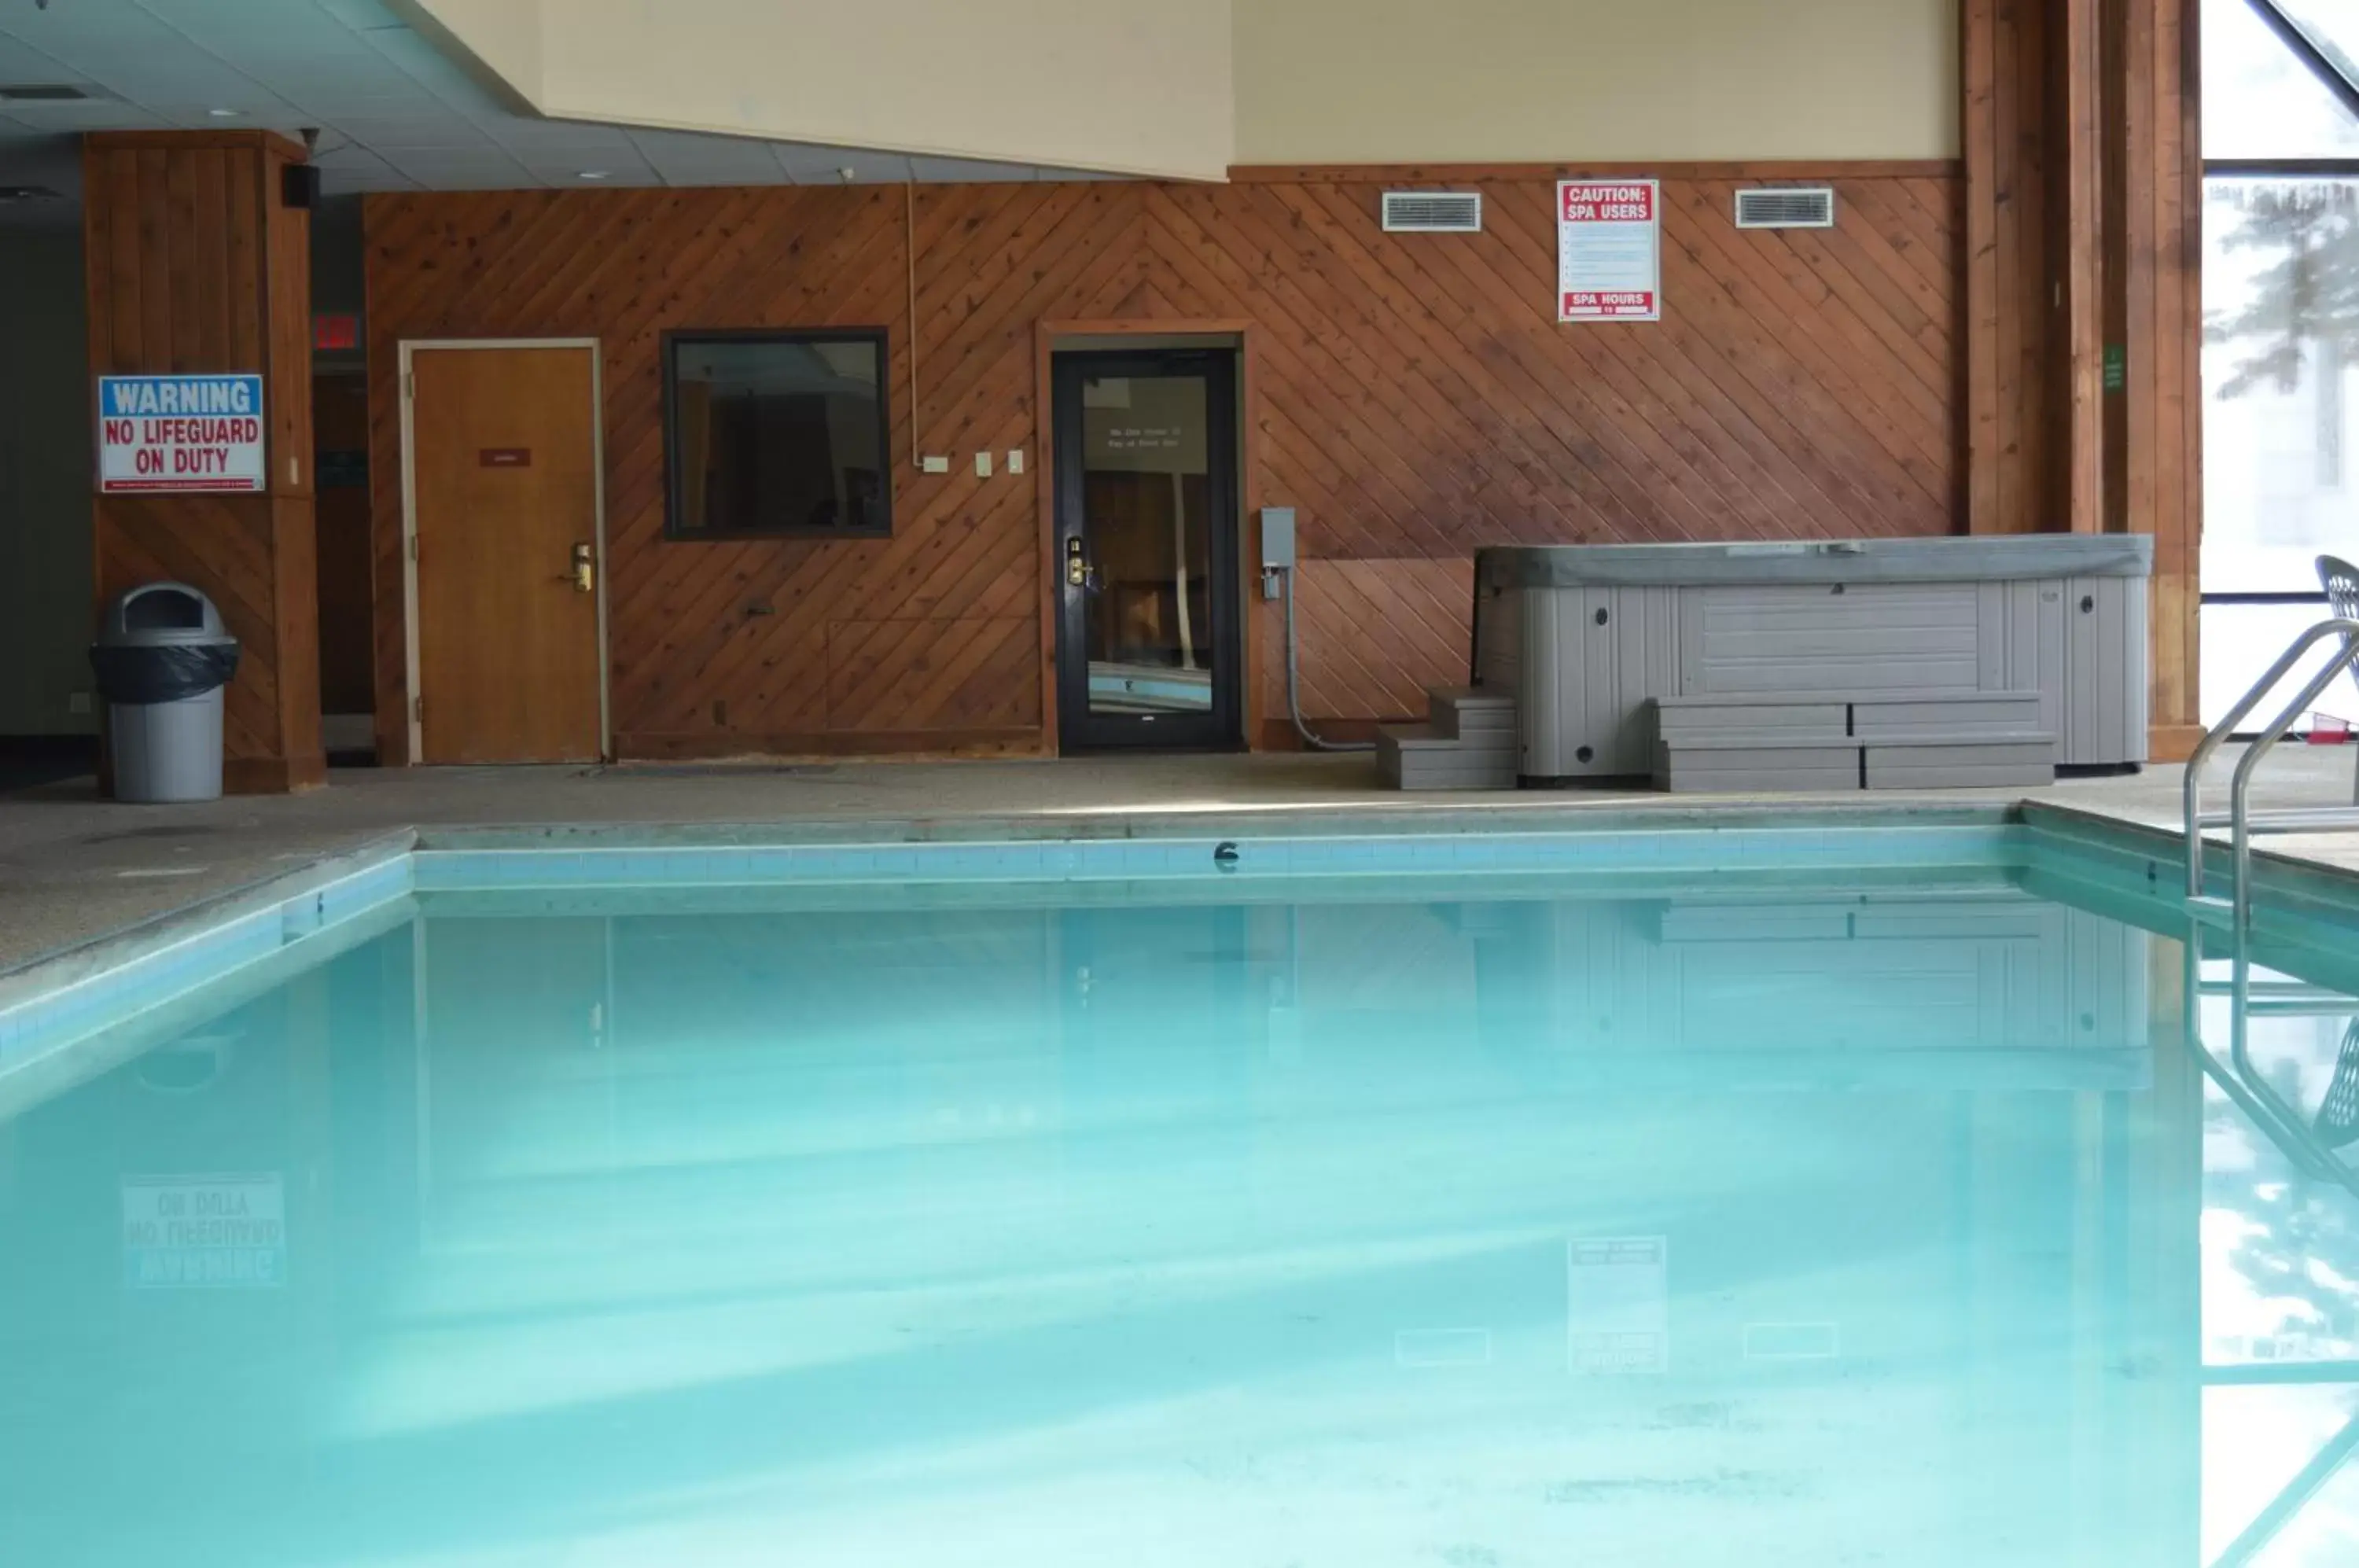 Swimming Pool in Crossroads Hotel and Huron Event Center